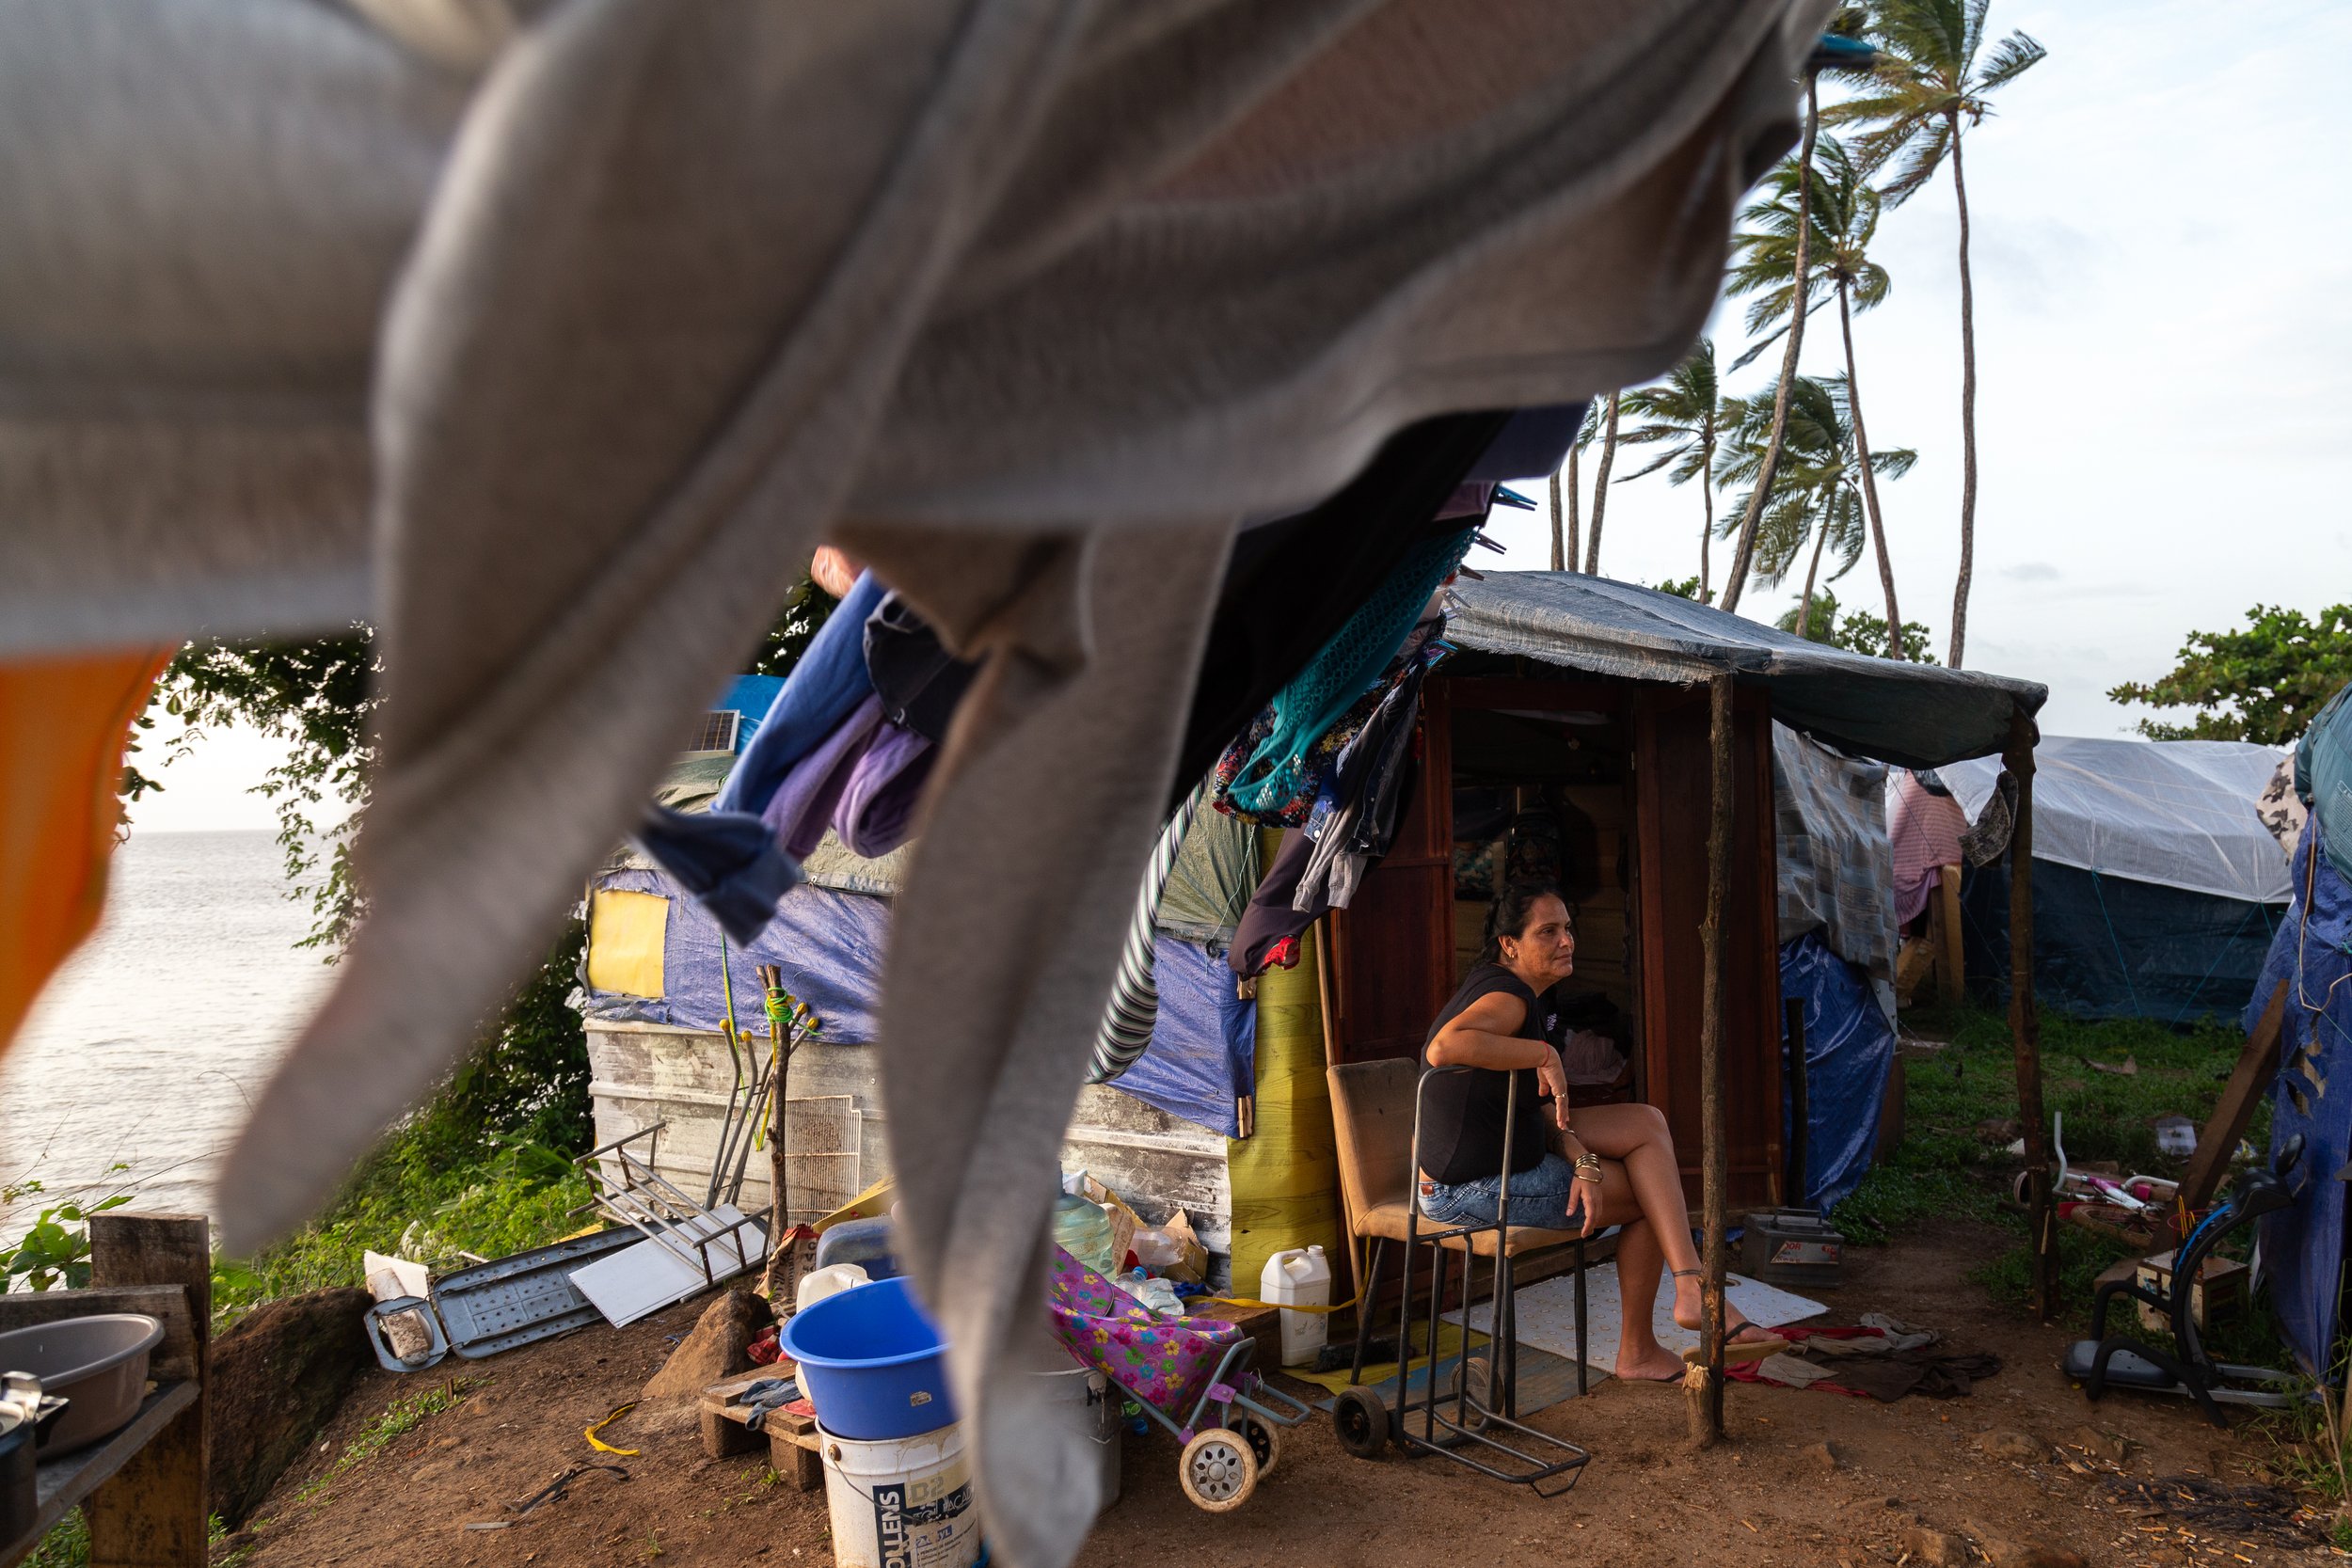 French Guiana in South America has emerged as a key destination and transit point for migrants and asylum seekers trying to reach Europe, attracting thousands in 2020 from as far away as Syria.